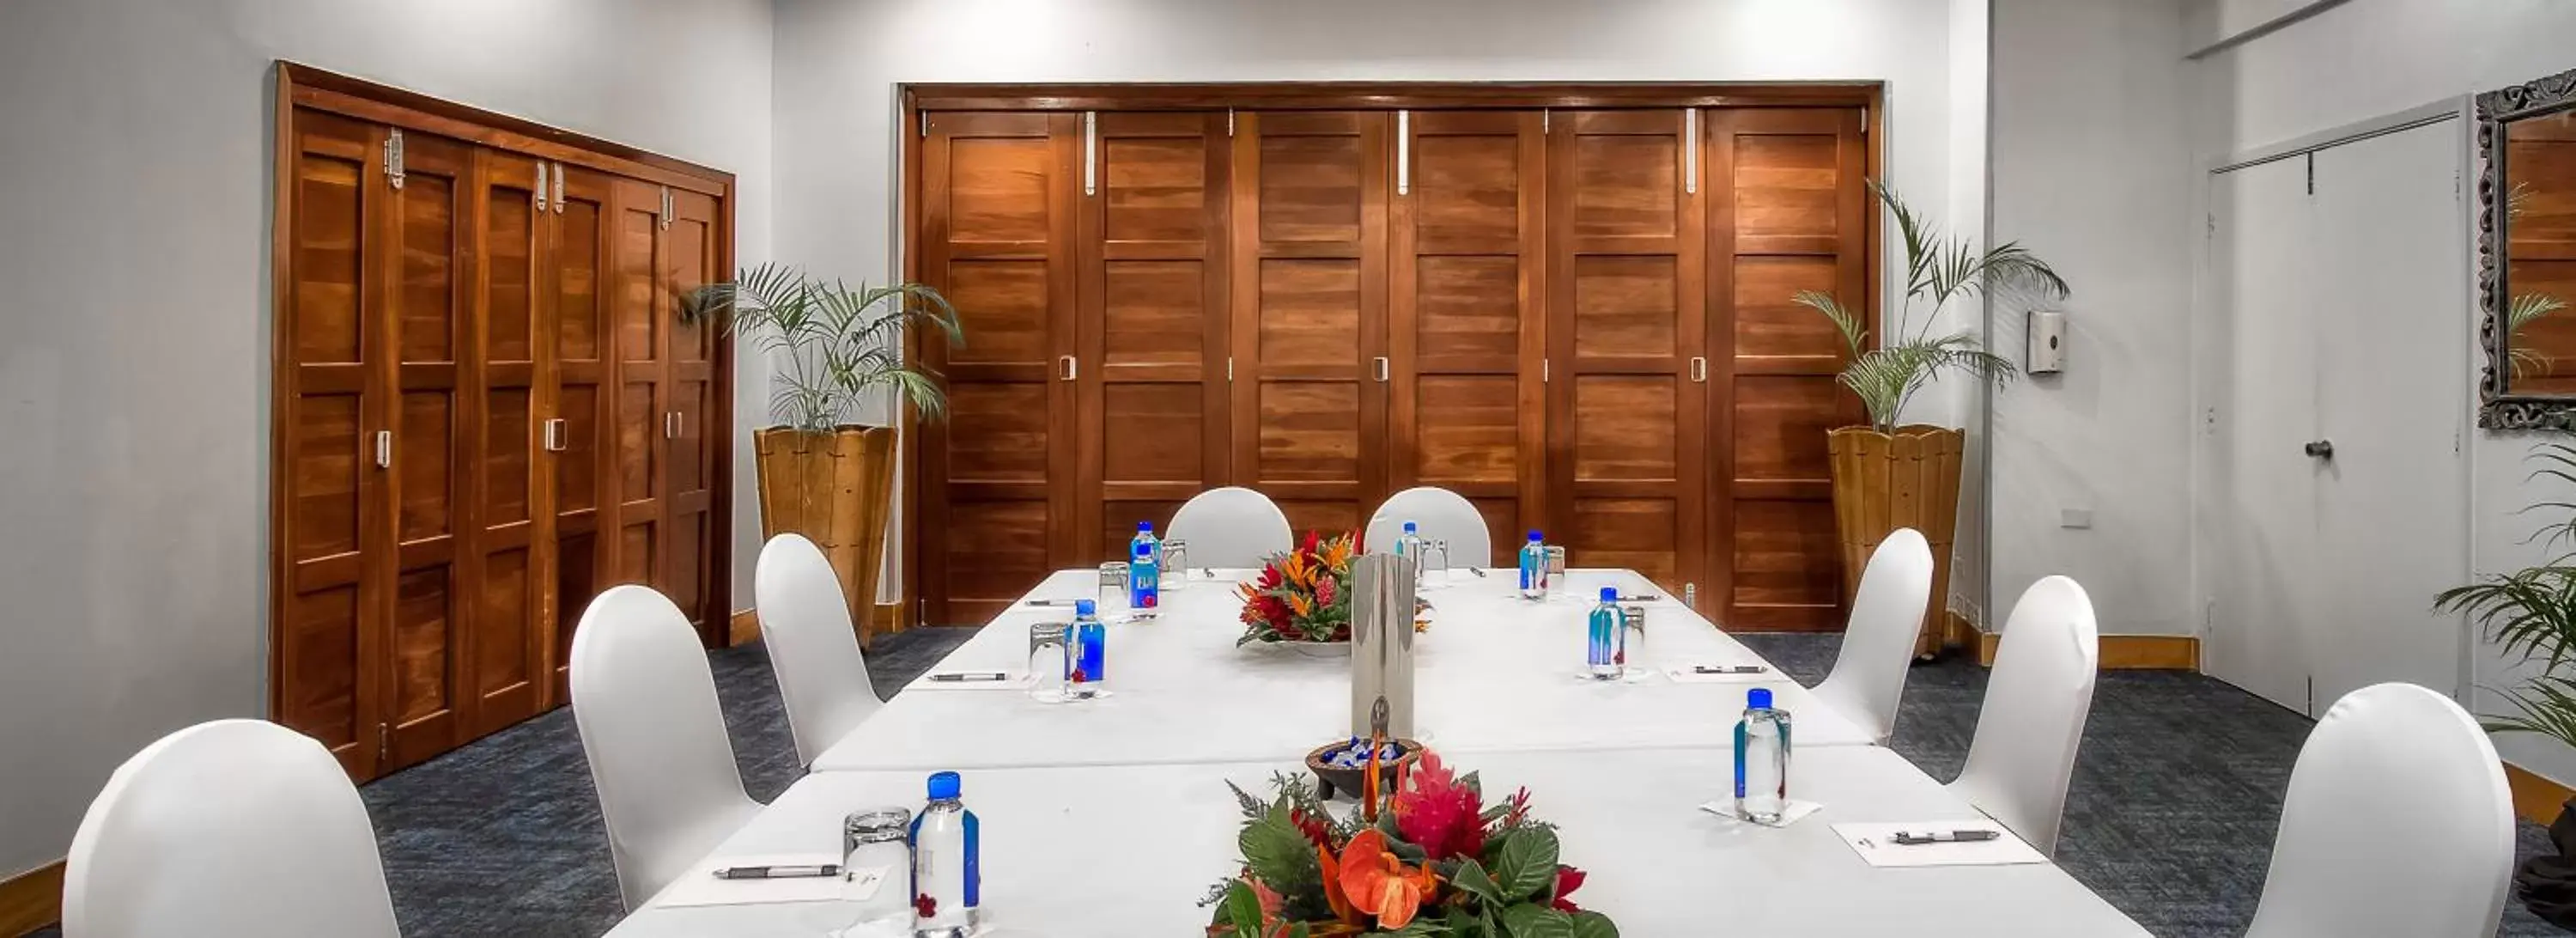 Meeting/conference room in Tanoa Plaza Hotel